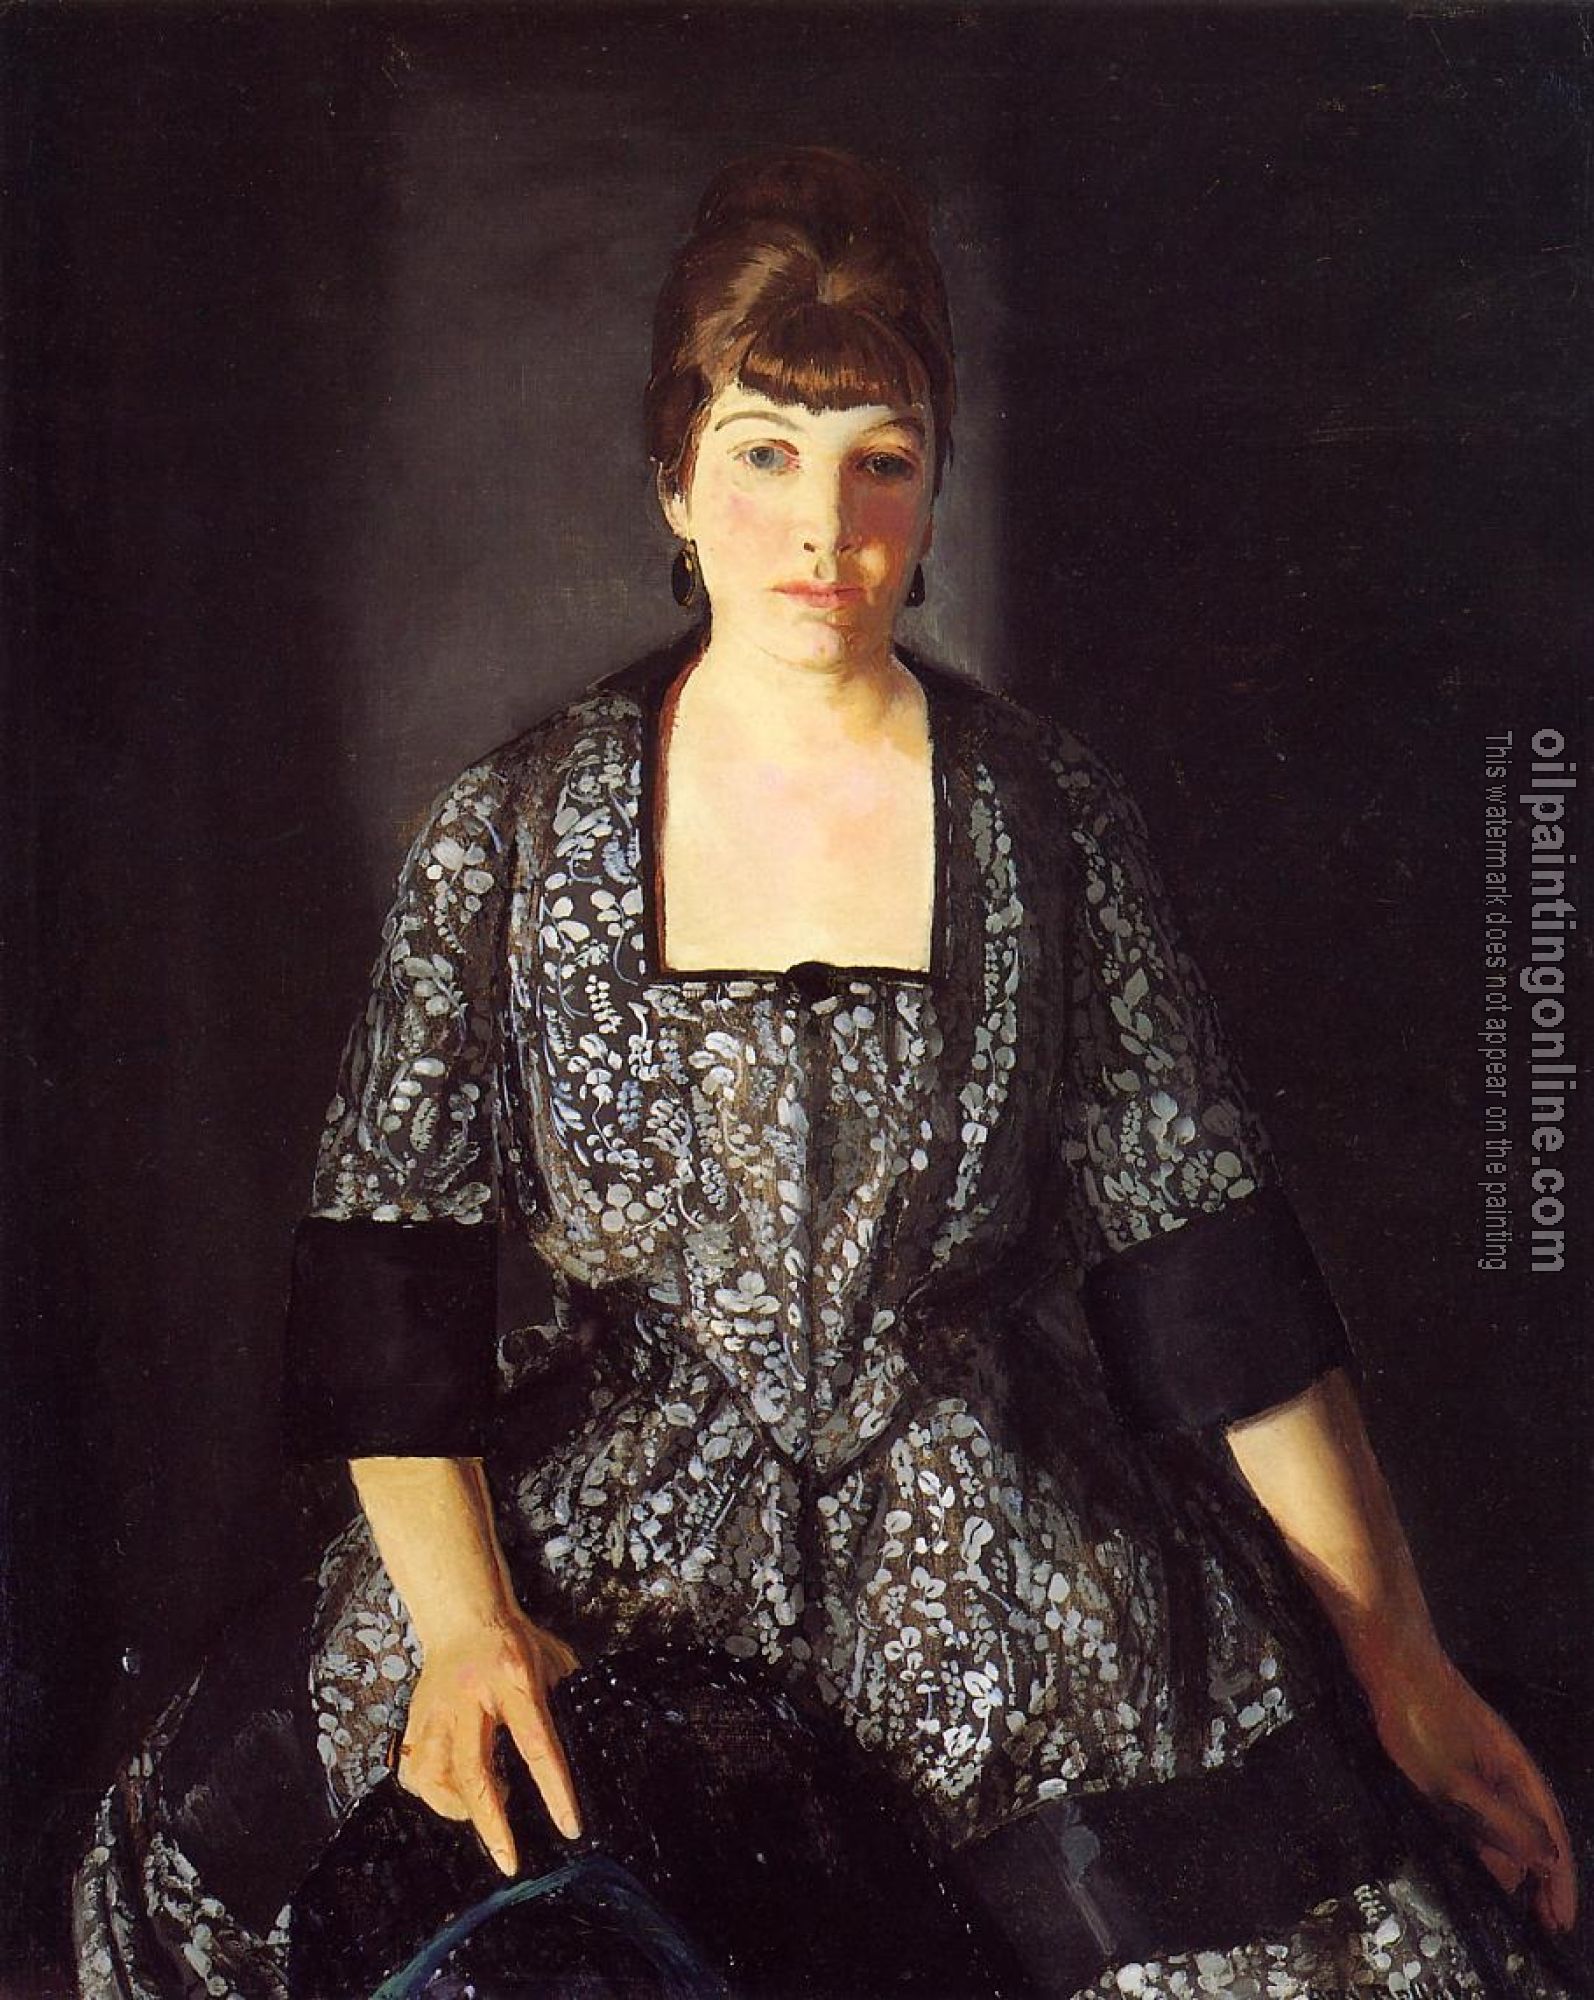 Bellows, George - Emma in the Black Print